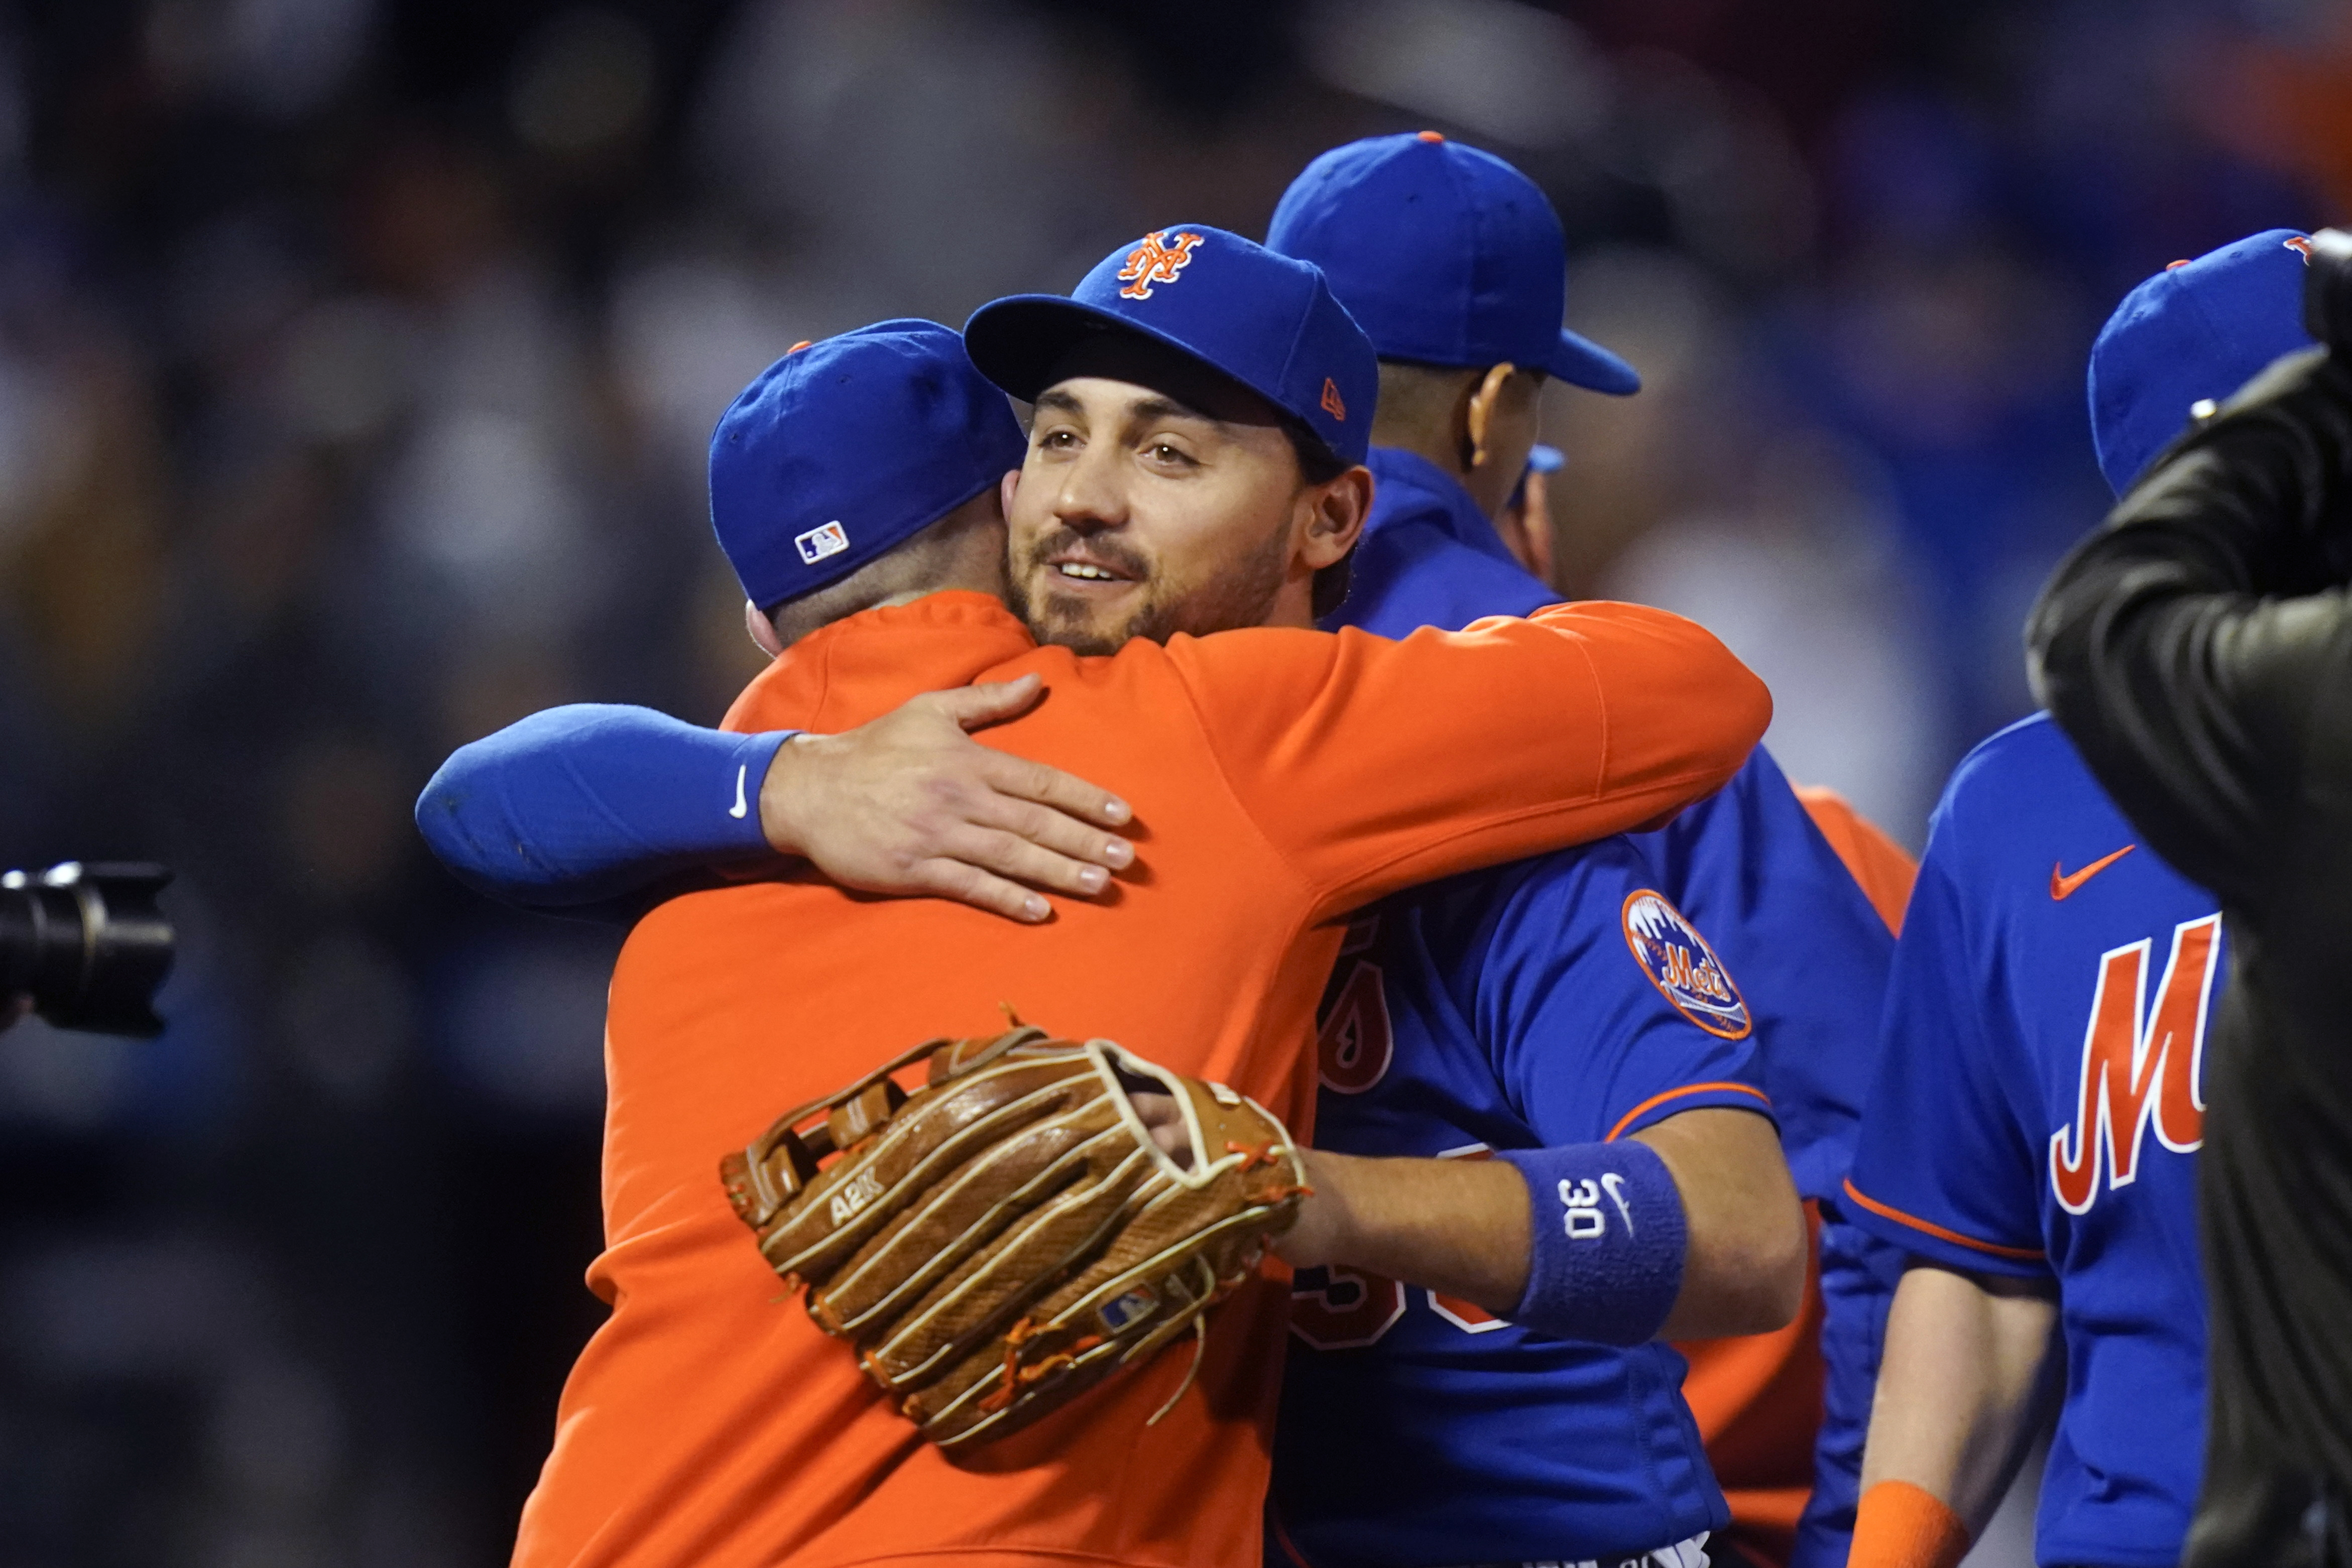 For Mets outfielder Michael Conforto, 'the sky's the limit,' his